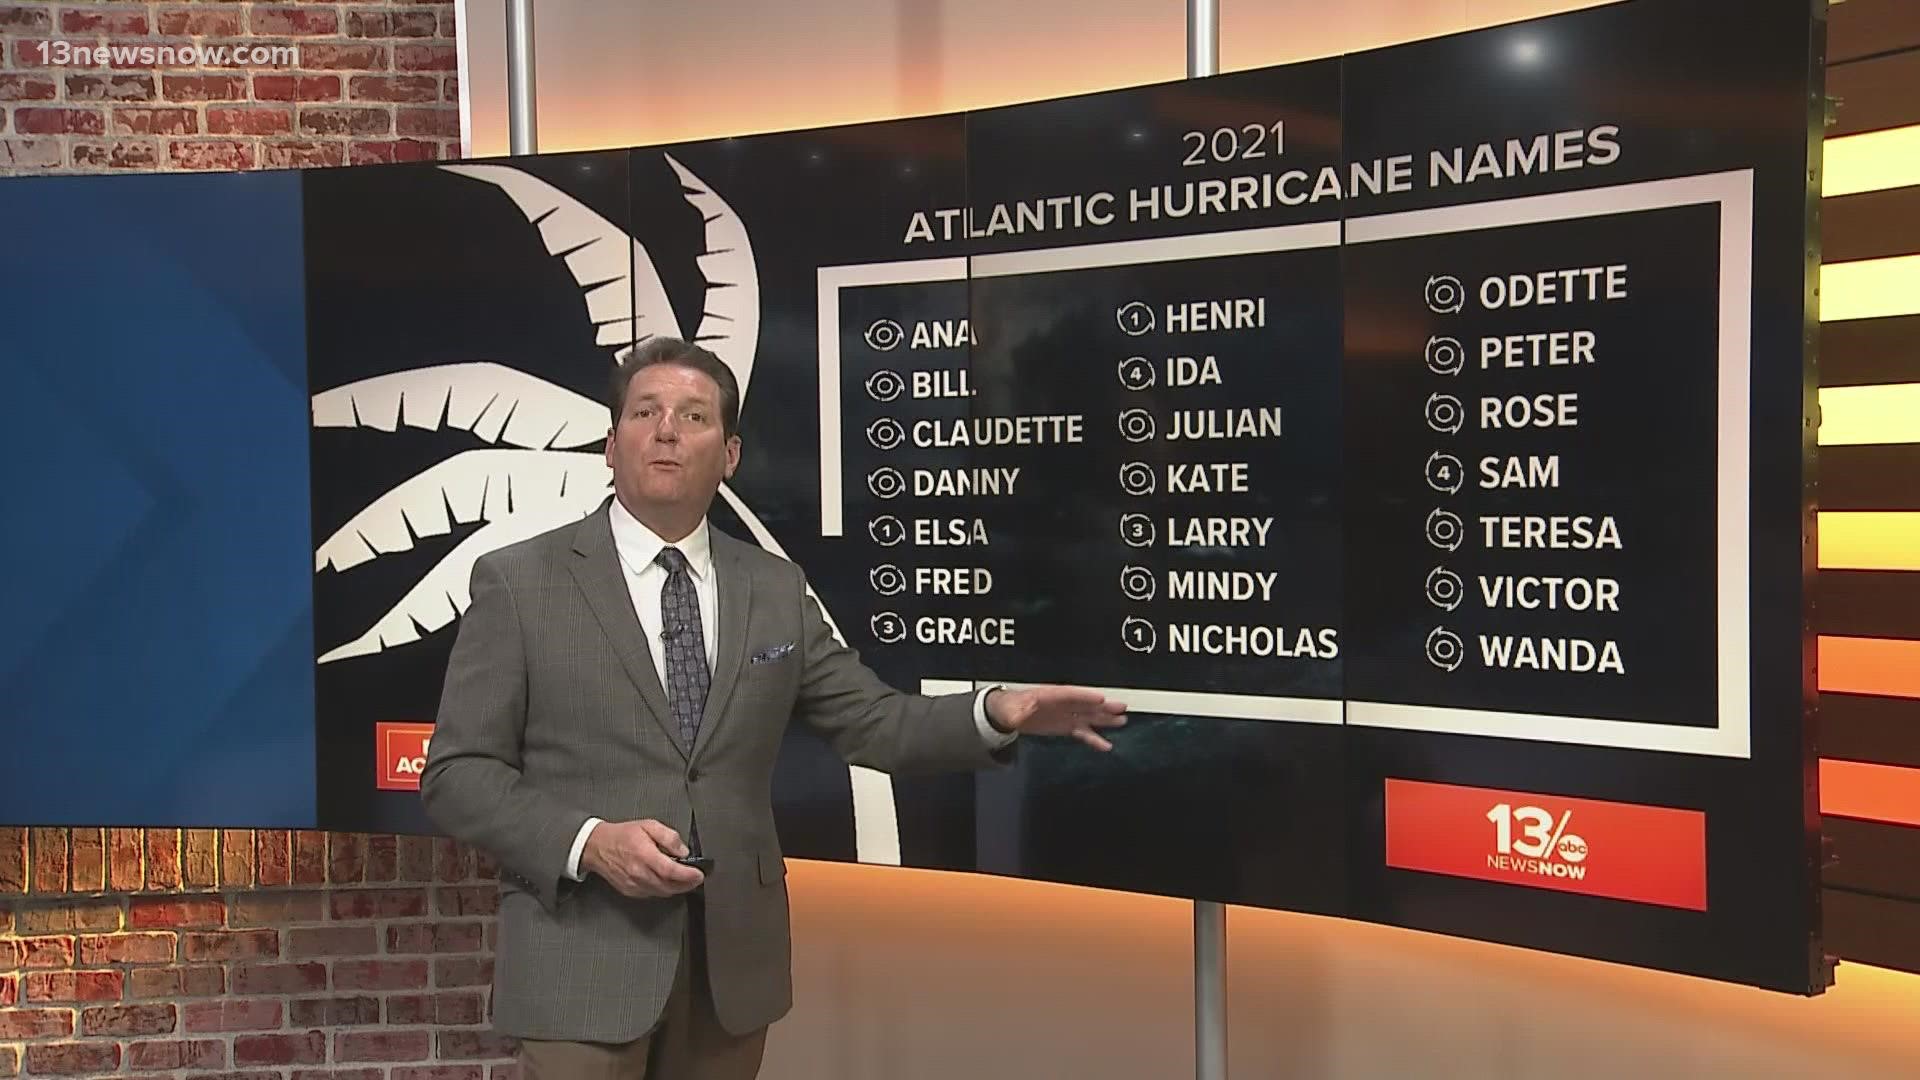 This year was the third most active hurricane season on record for the Atlantic coast, there were 21 named storms.